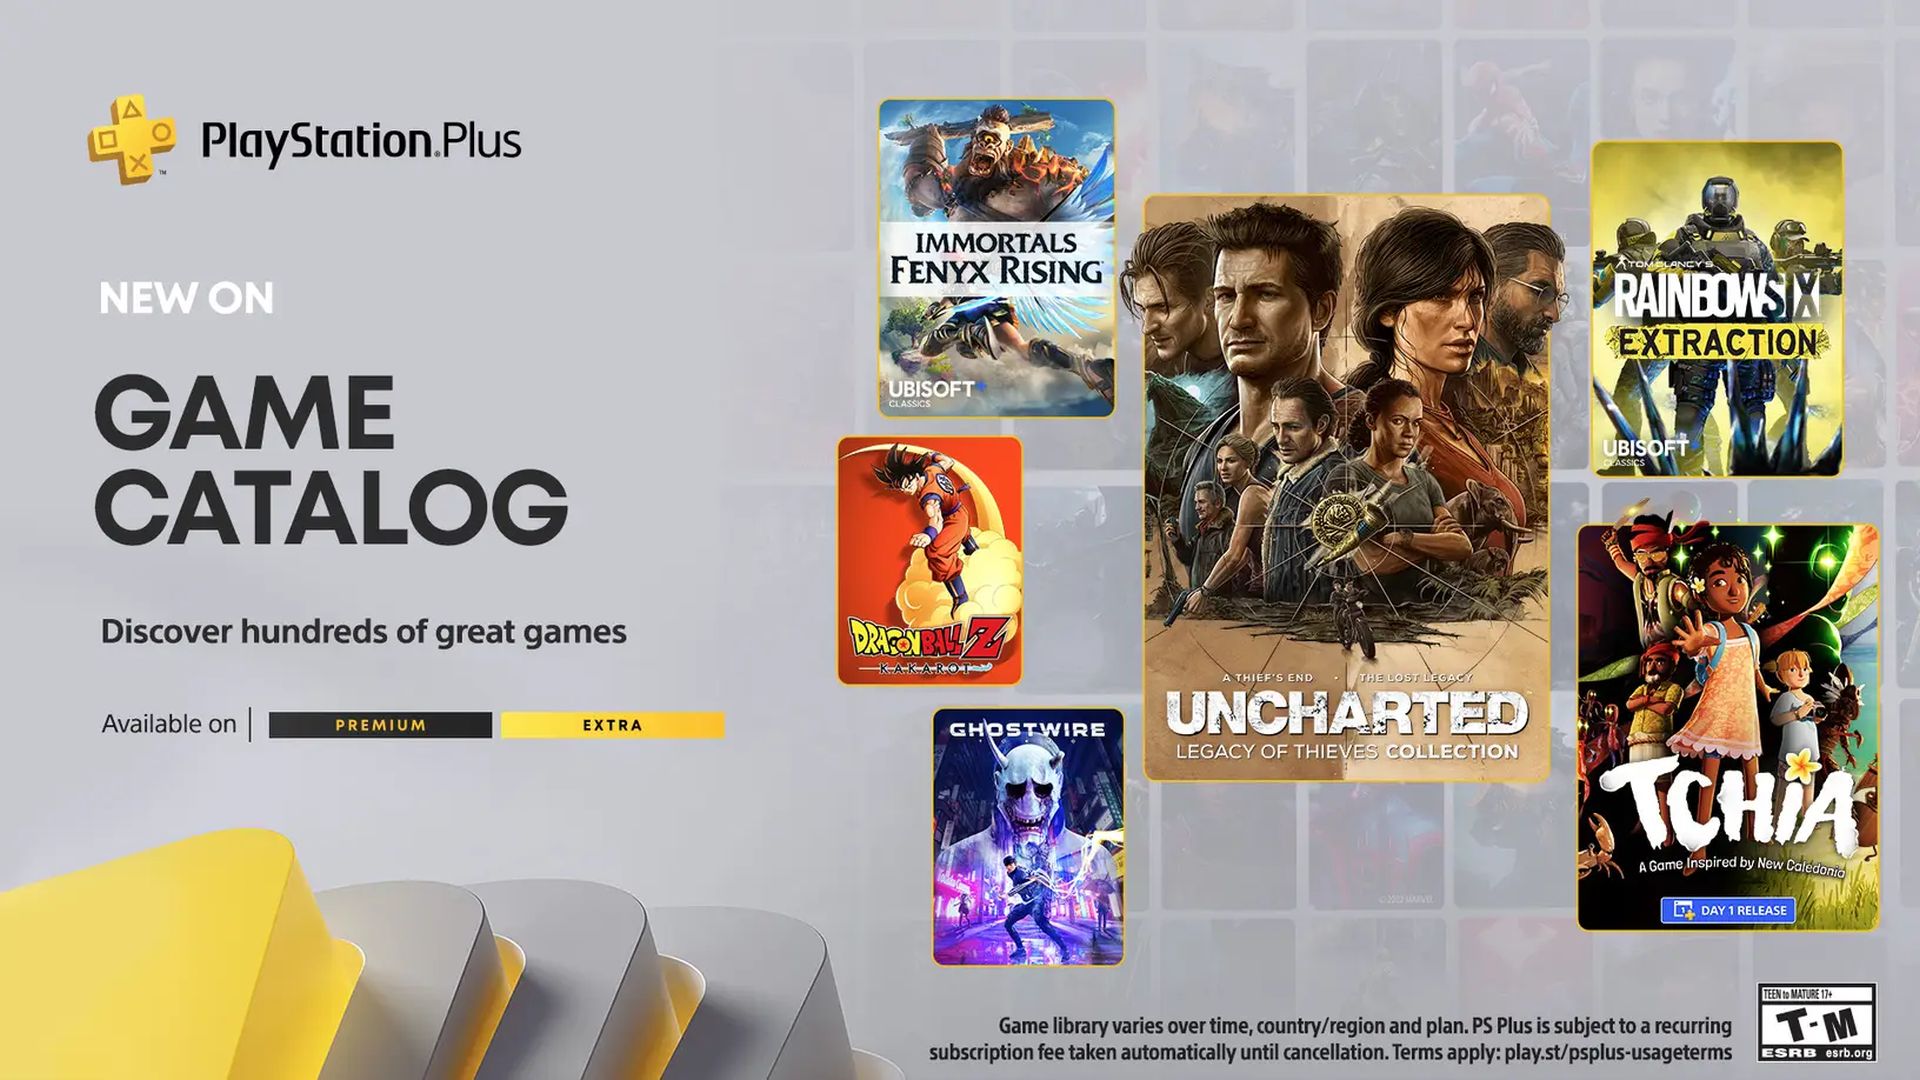 No multiplayer in Uncharted: Legacy of Thieves Collection